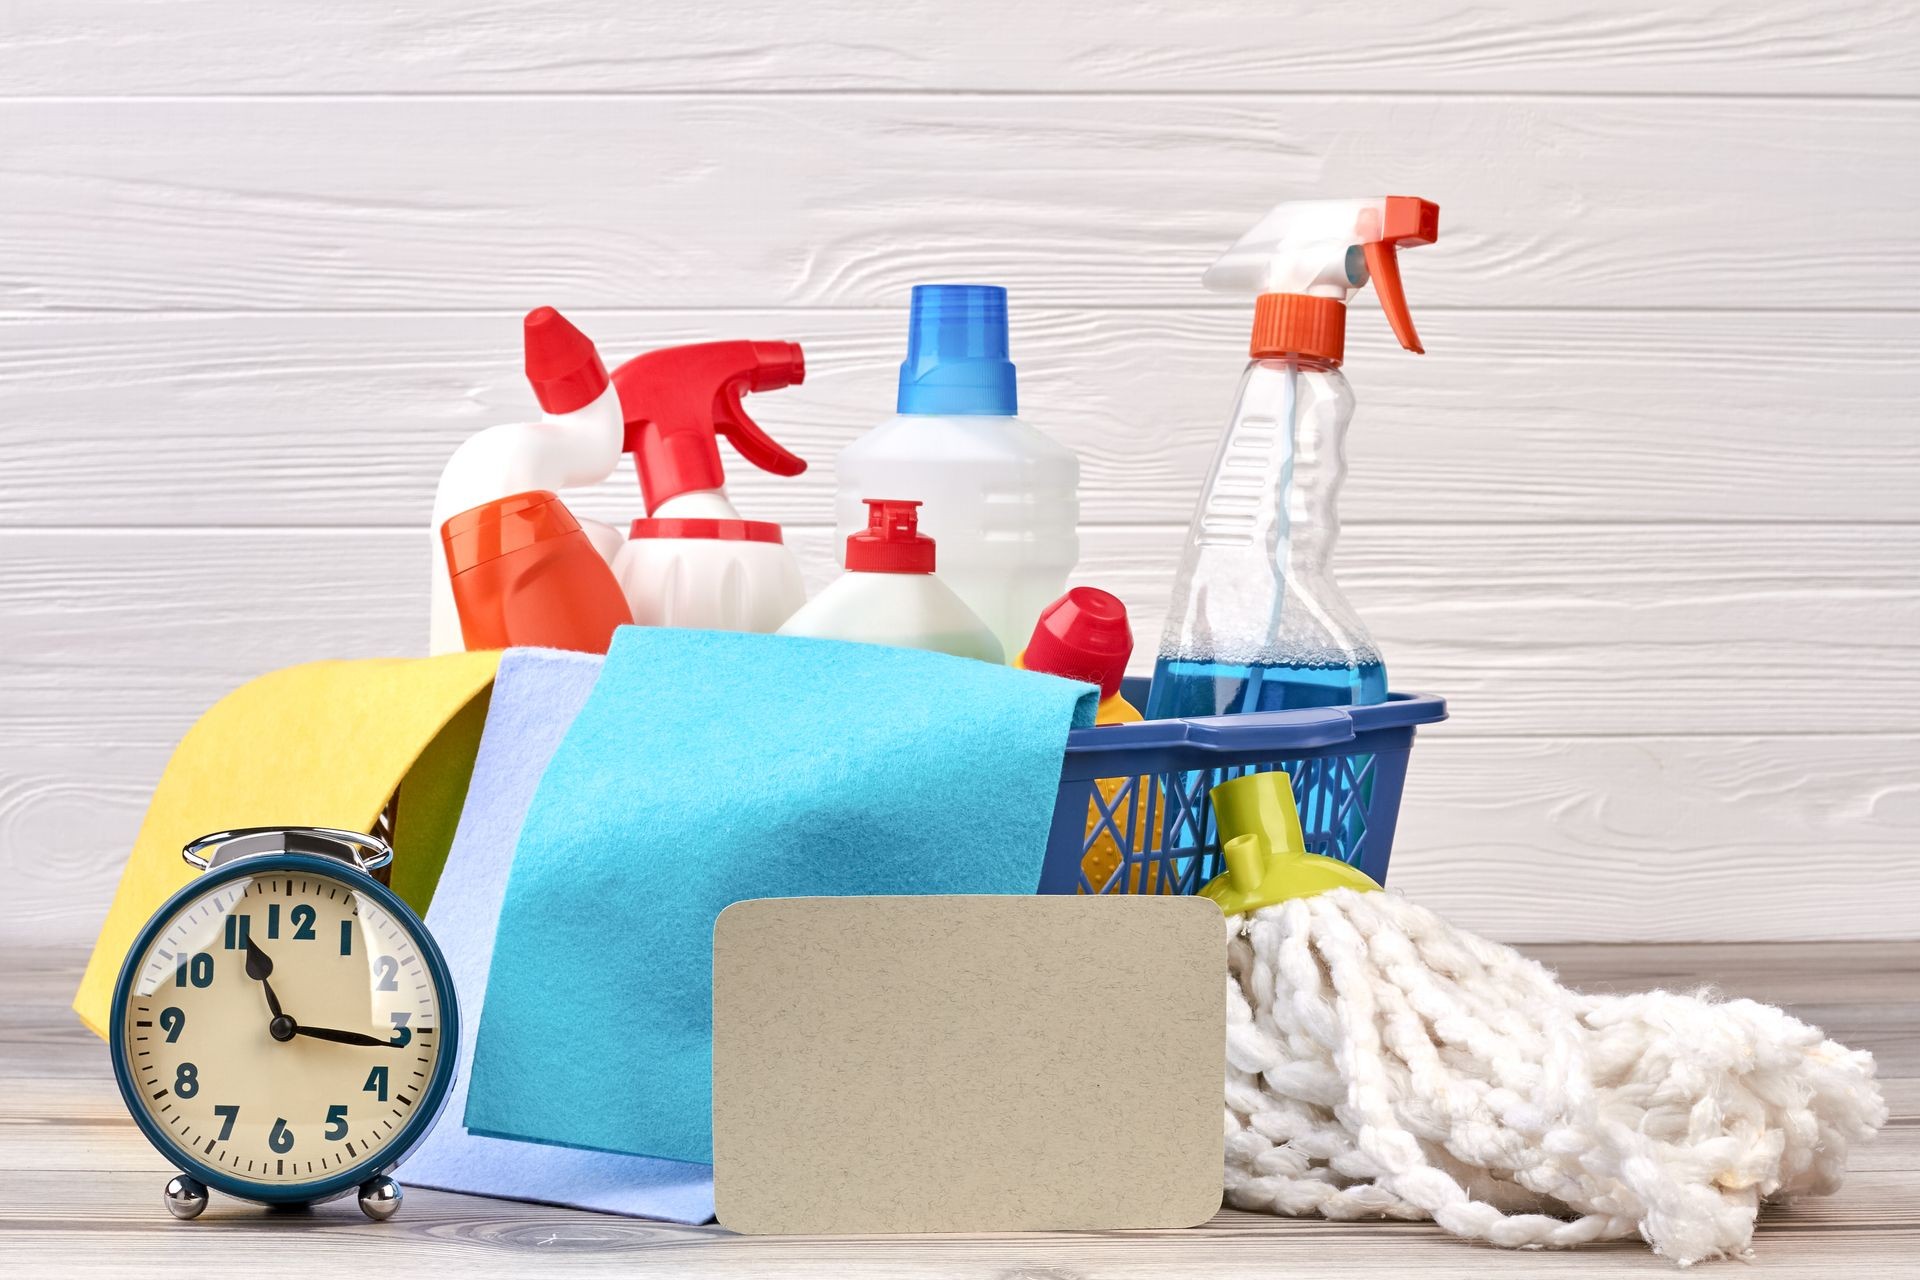 Variety of cleaning supplies on wooden background. Plastic basket with cleaning products, alarm clock and paper card. Domestic cleaning company.